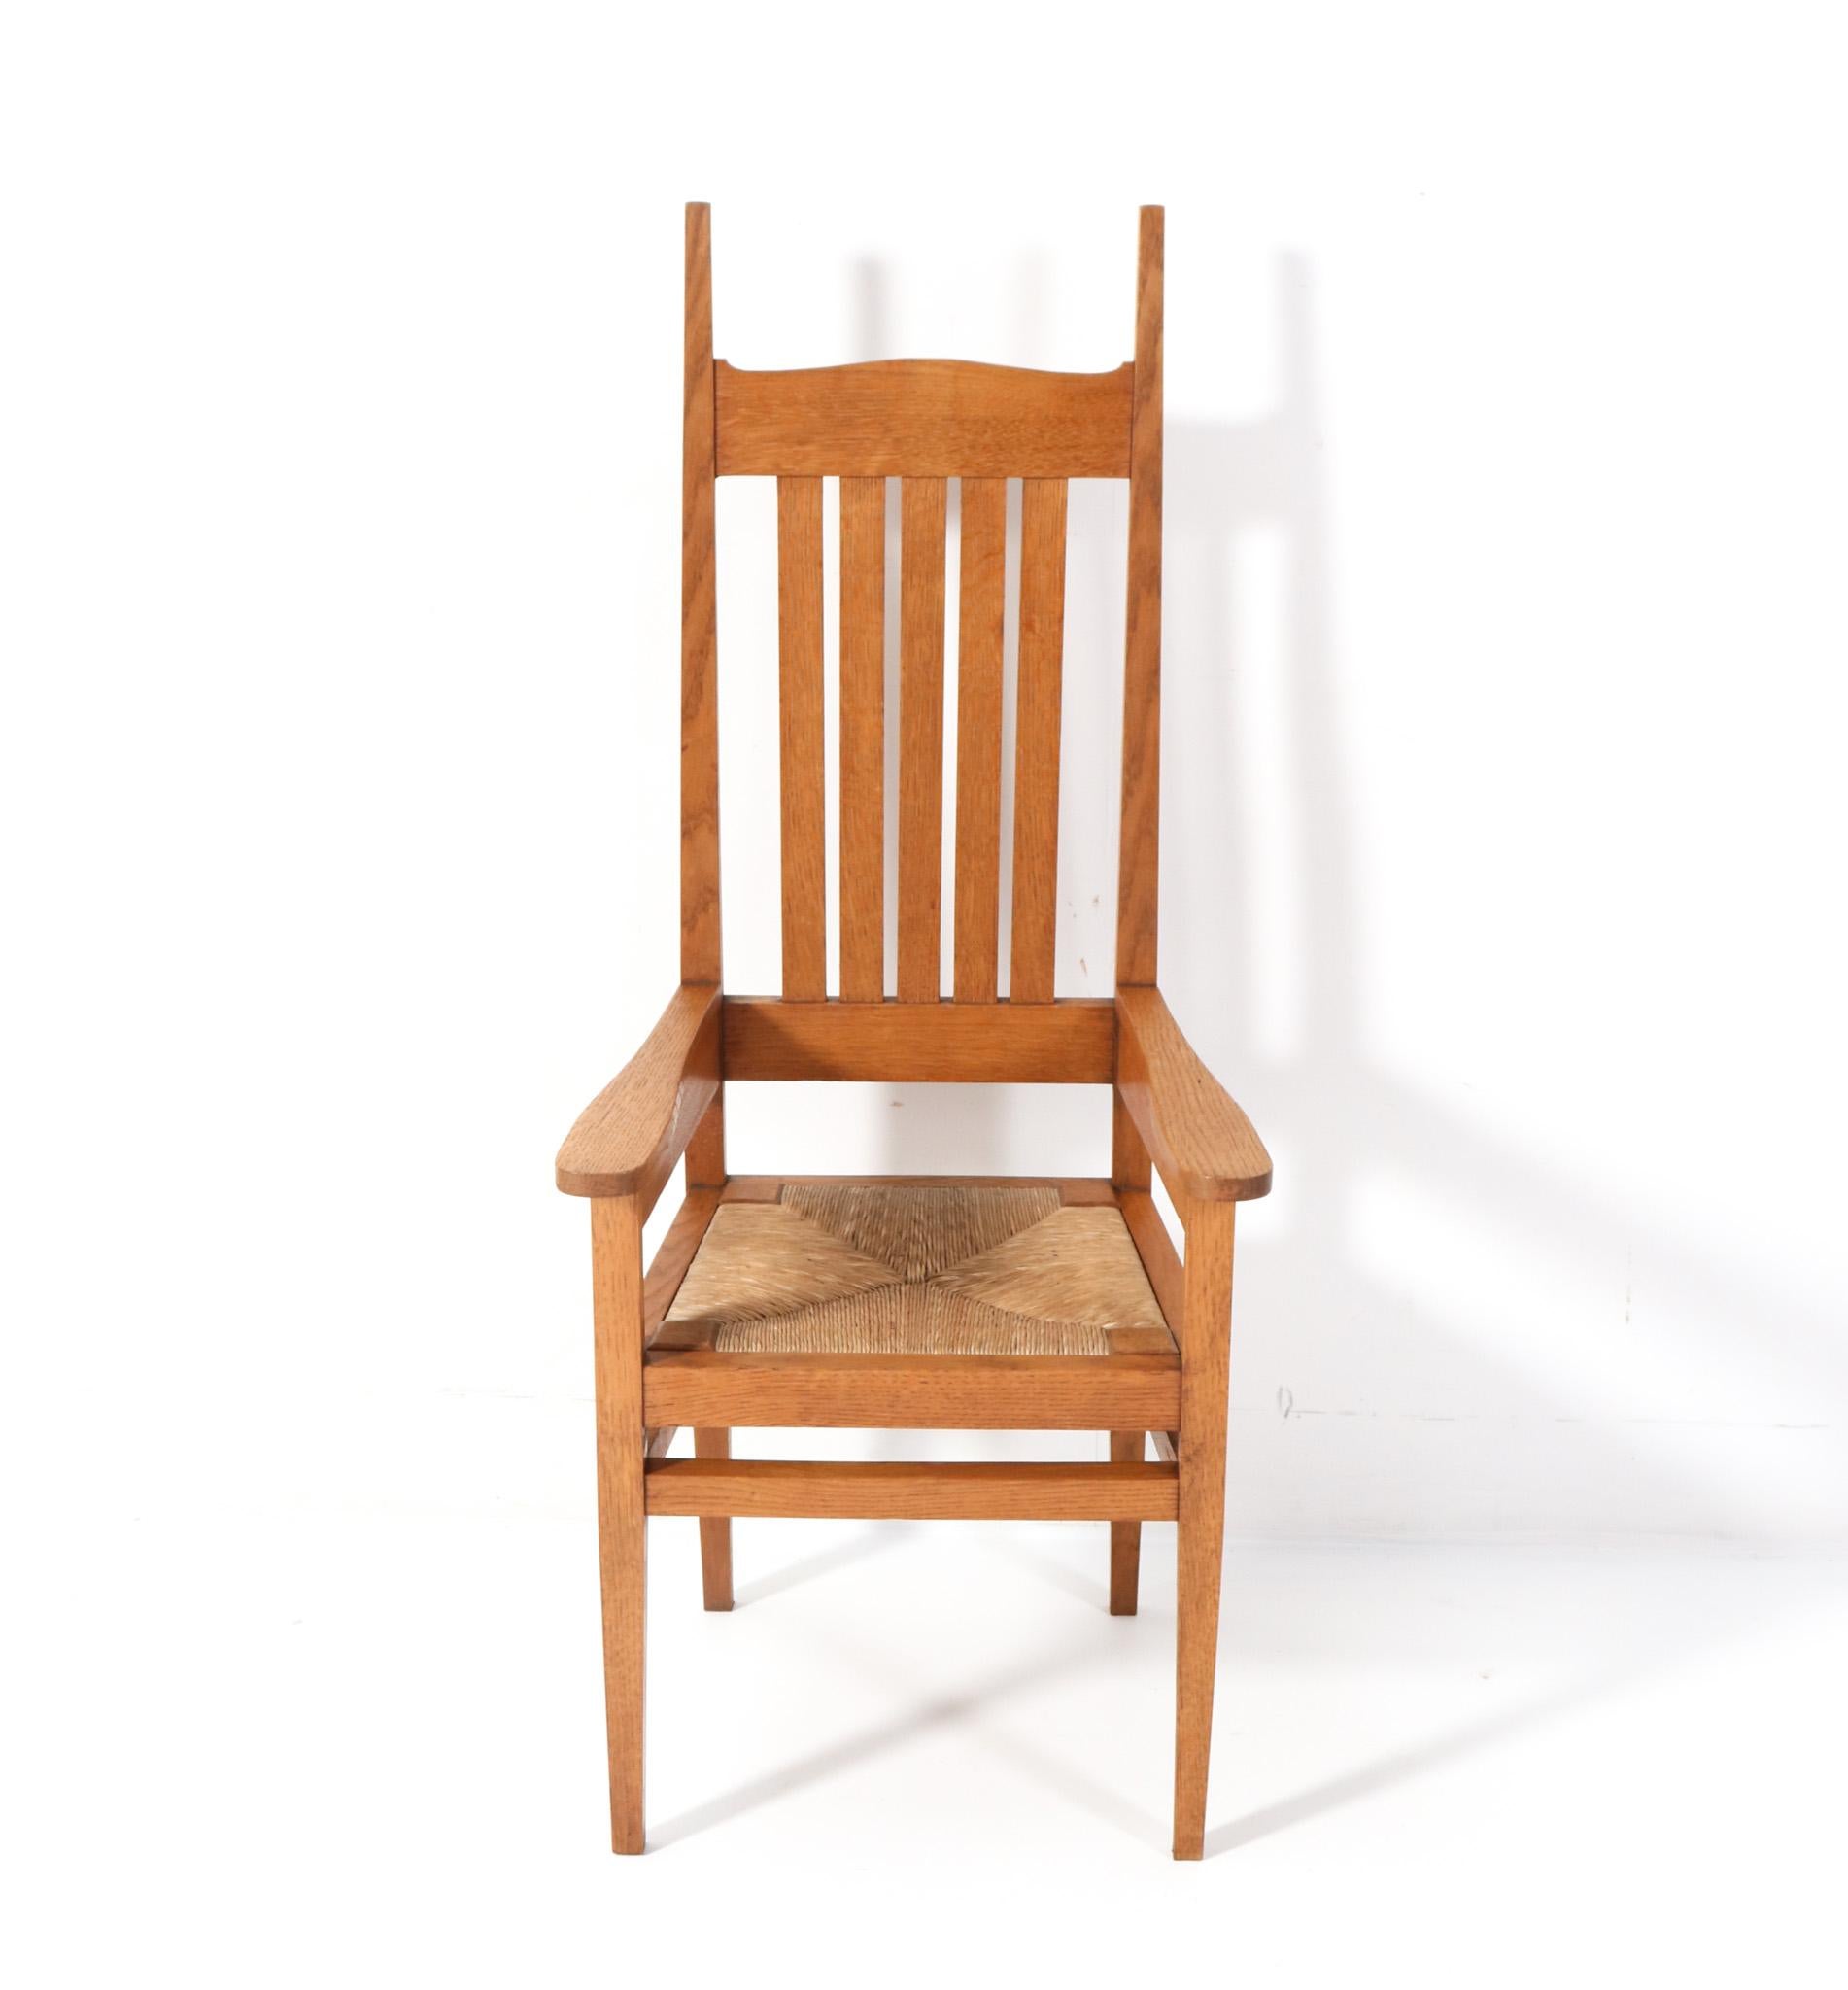 Magnificent and rare Arts & Crafts ladies high-back armchair.
Design by Charles Francis Annesley Voysey.
Striking English design from the 1900s.
Solid oak frame with original rush seat.
This wonderful Arts & Crafts ladies high-back armchair by